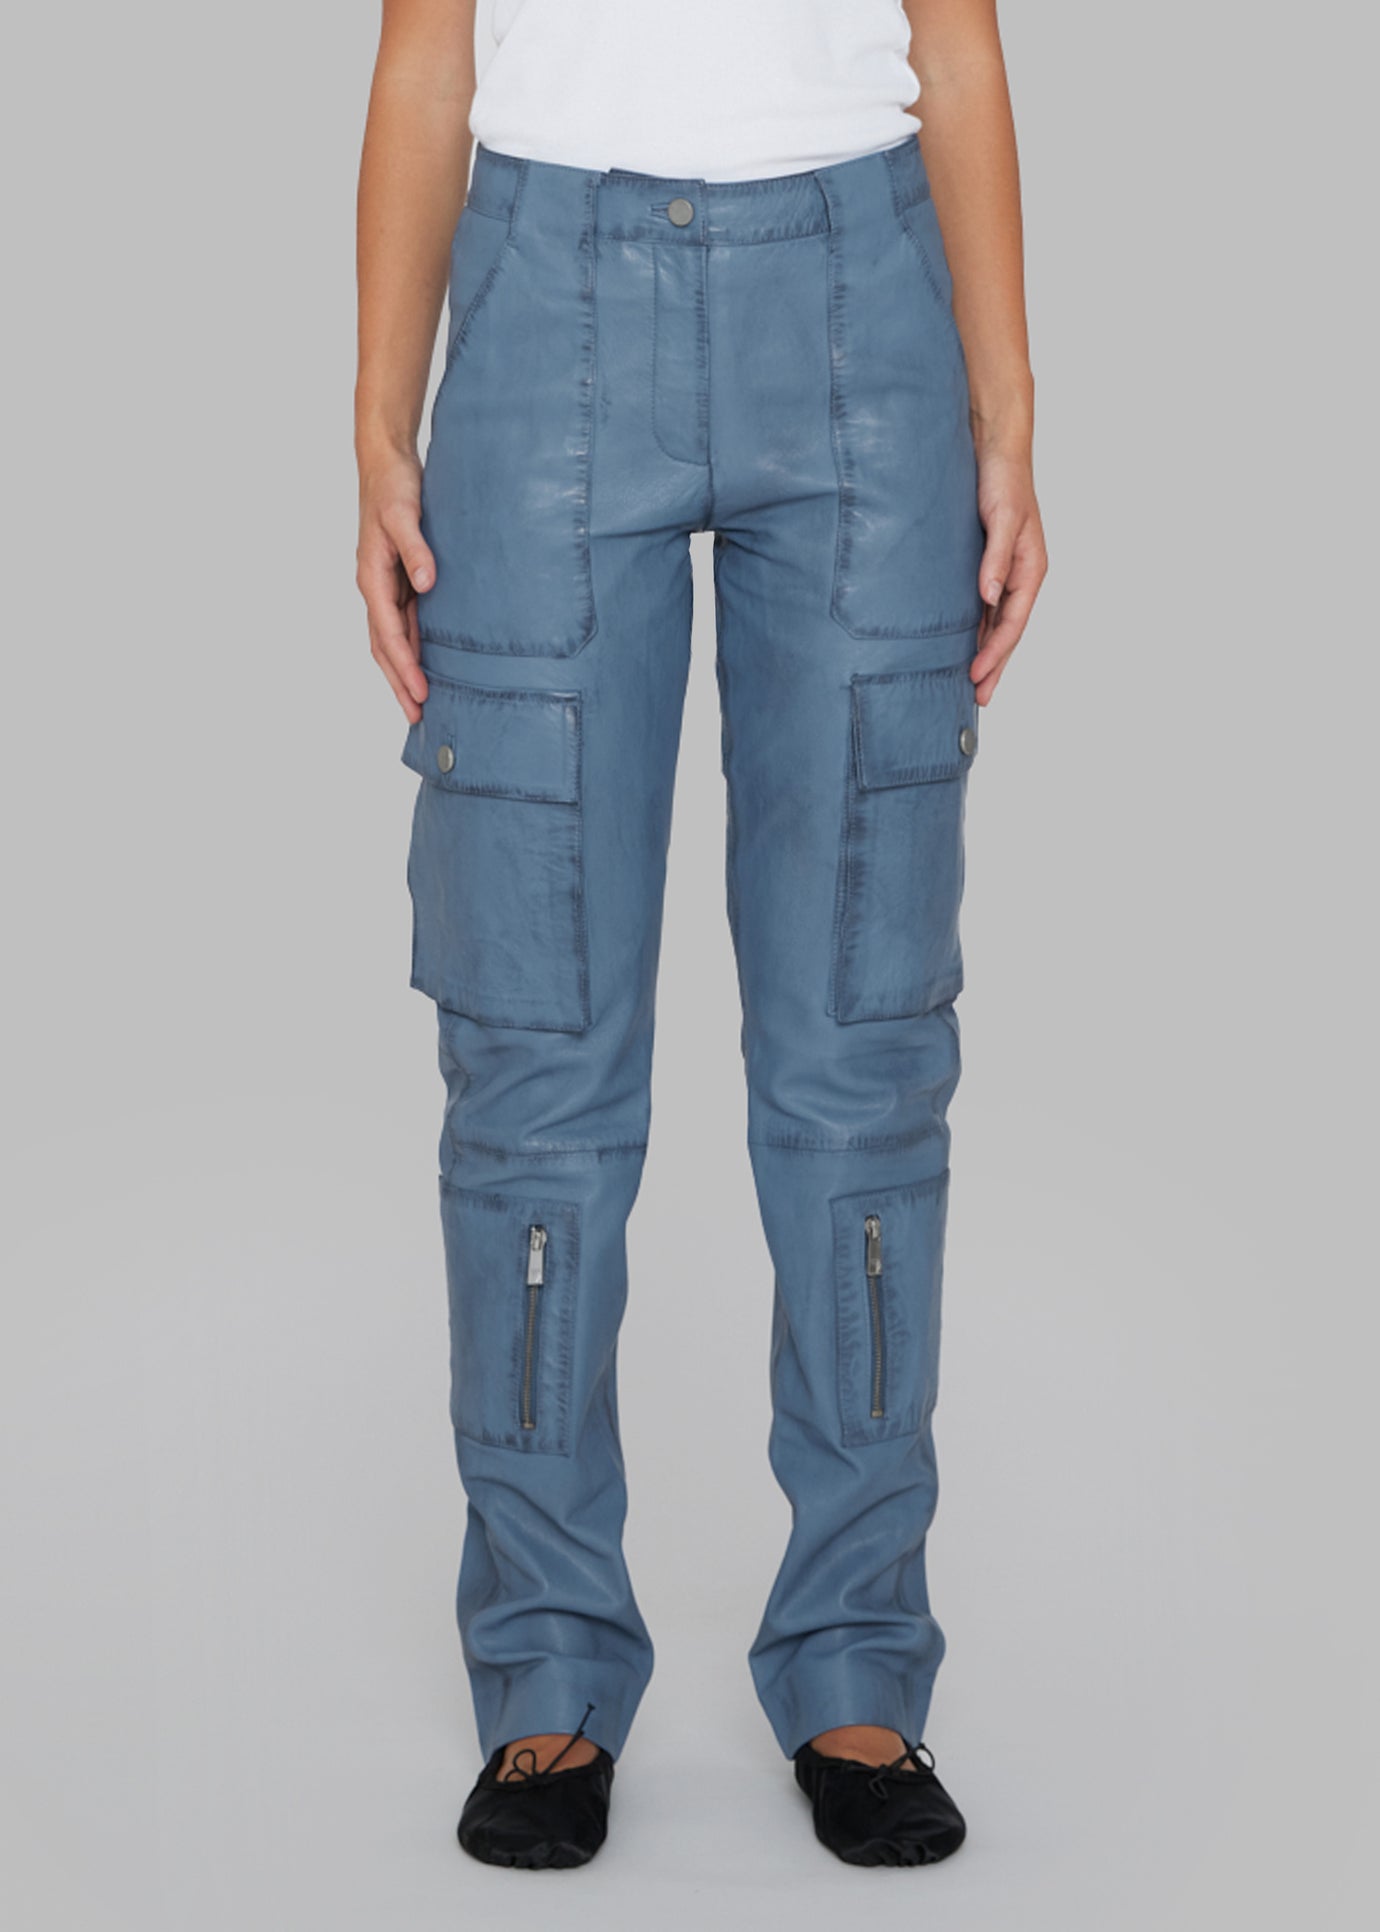 REMAIN Leather Fitted Pants - Coronet Blue